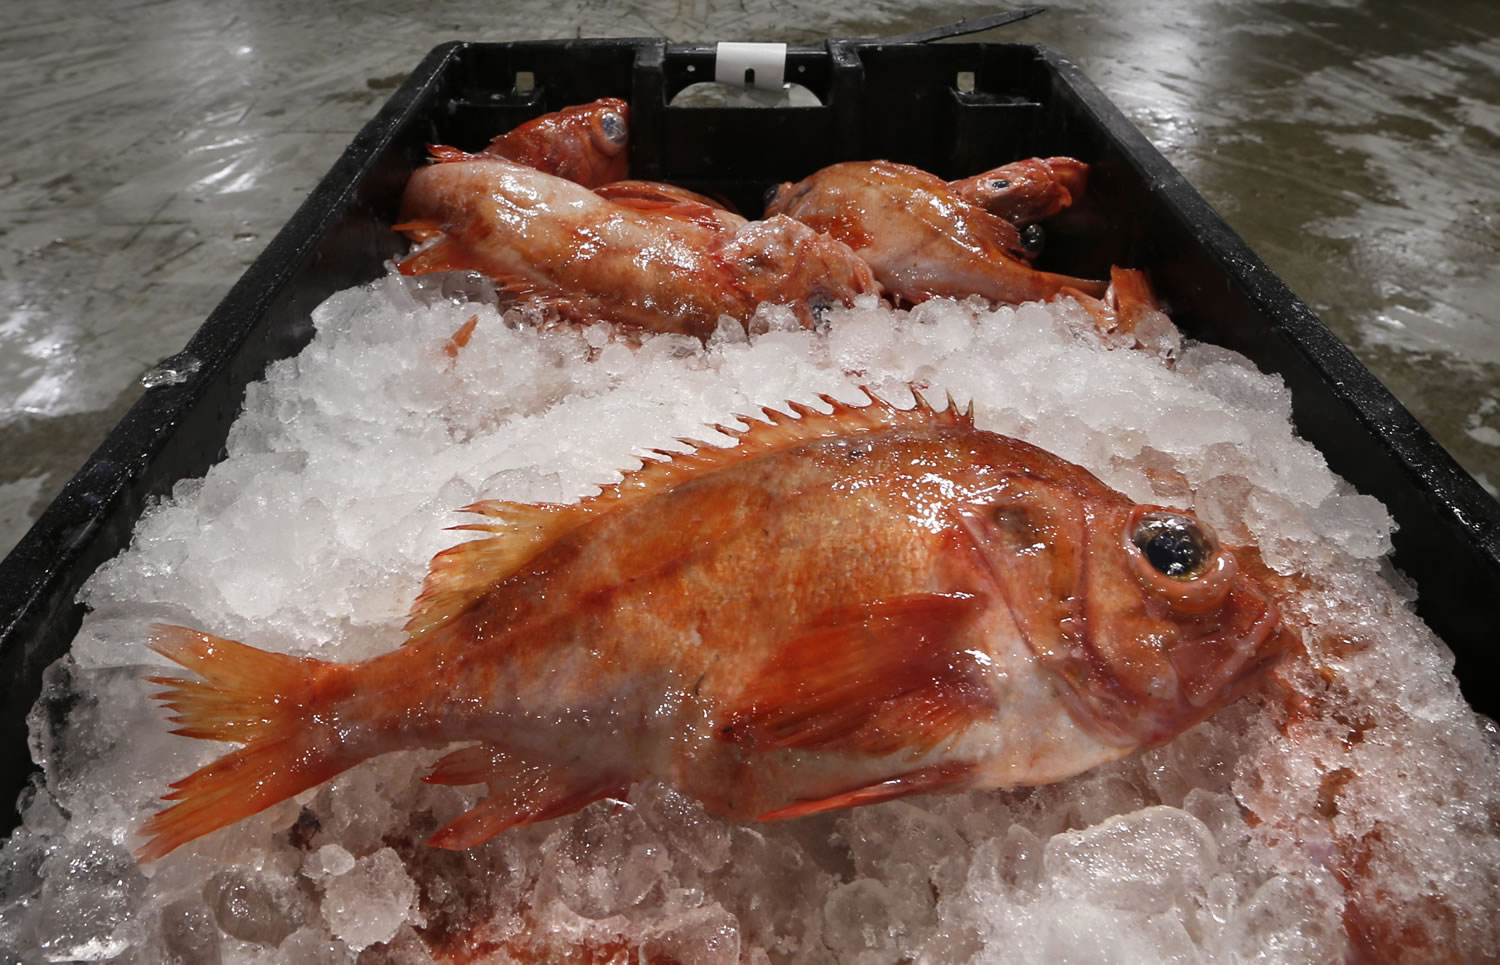 Redfish are displayed at the Portland Fish Exchange in Portland, Maine. Fishermen are starting to adapt more quickly to changing fish stocks in ocean and market new species based on what is available. (Robert F.